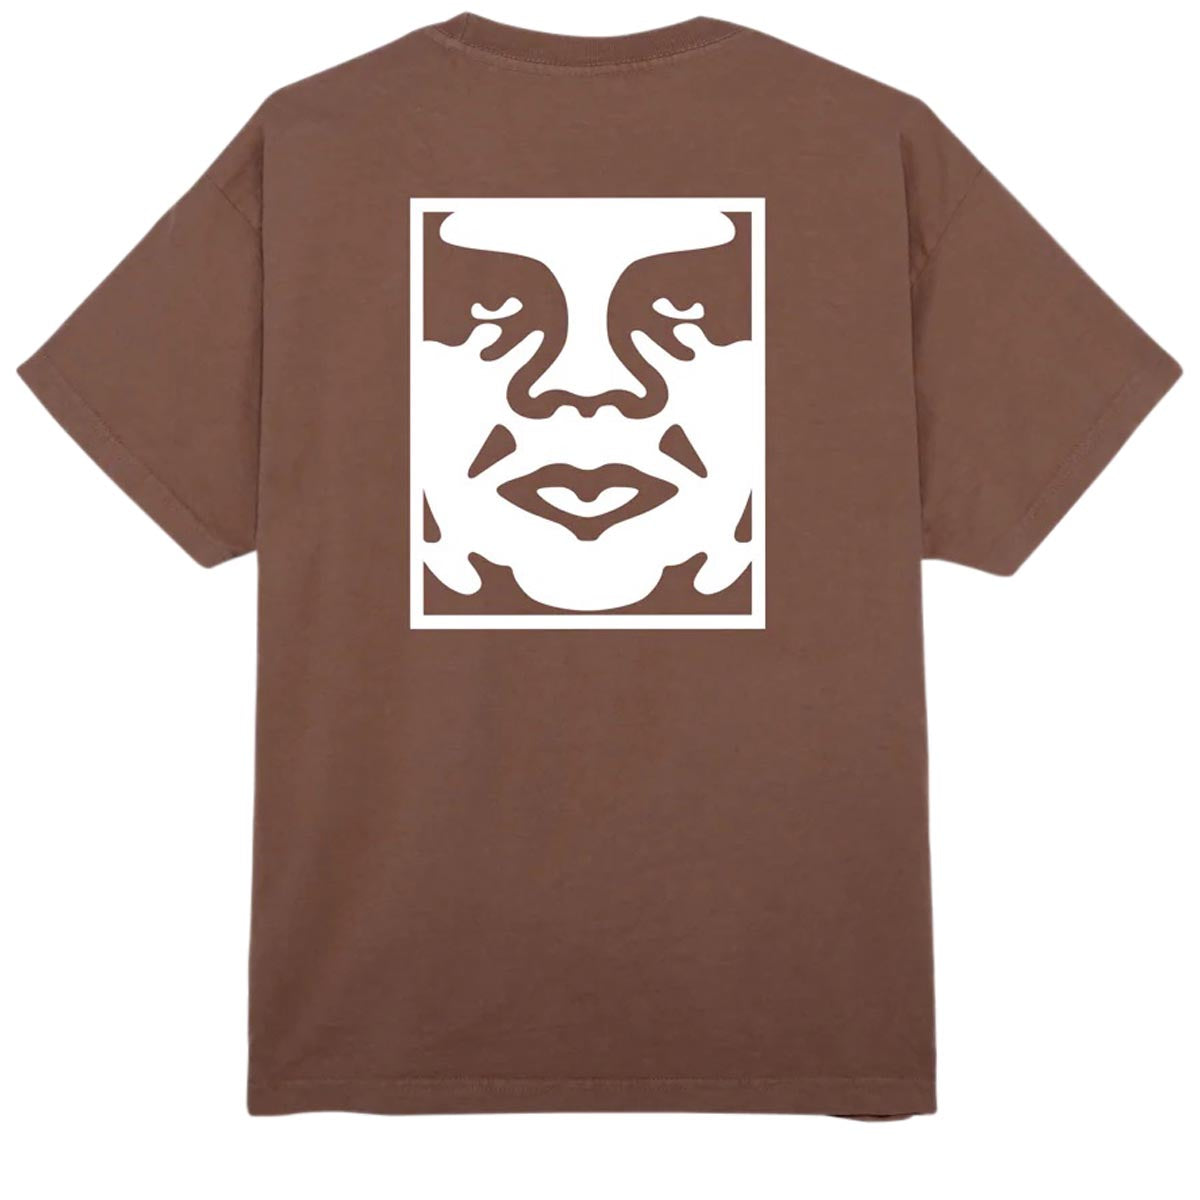 Obey Bold Icon Heavyweight T-Shirt - Sepia image 1